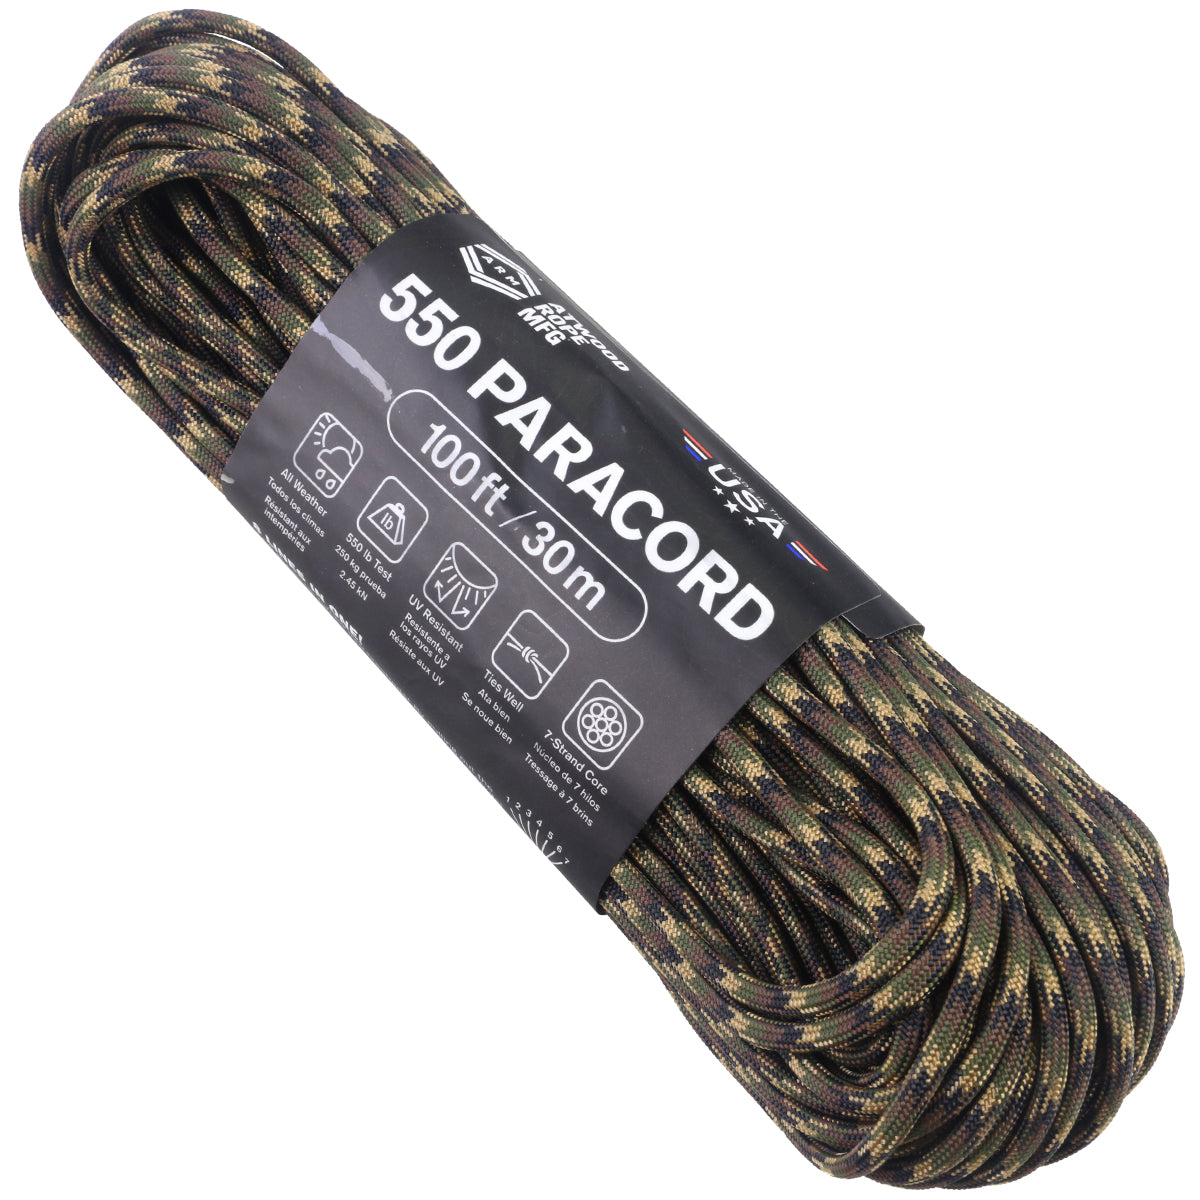 100ft Type III Chocolate Brown Paracord 550 Parachute Cord 7 Strand Made in USA